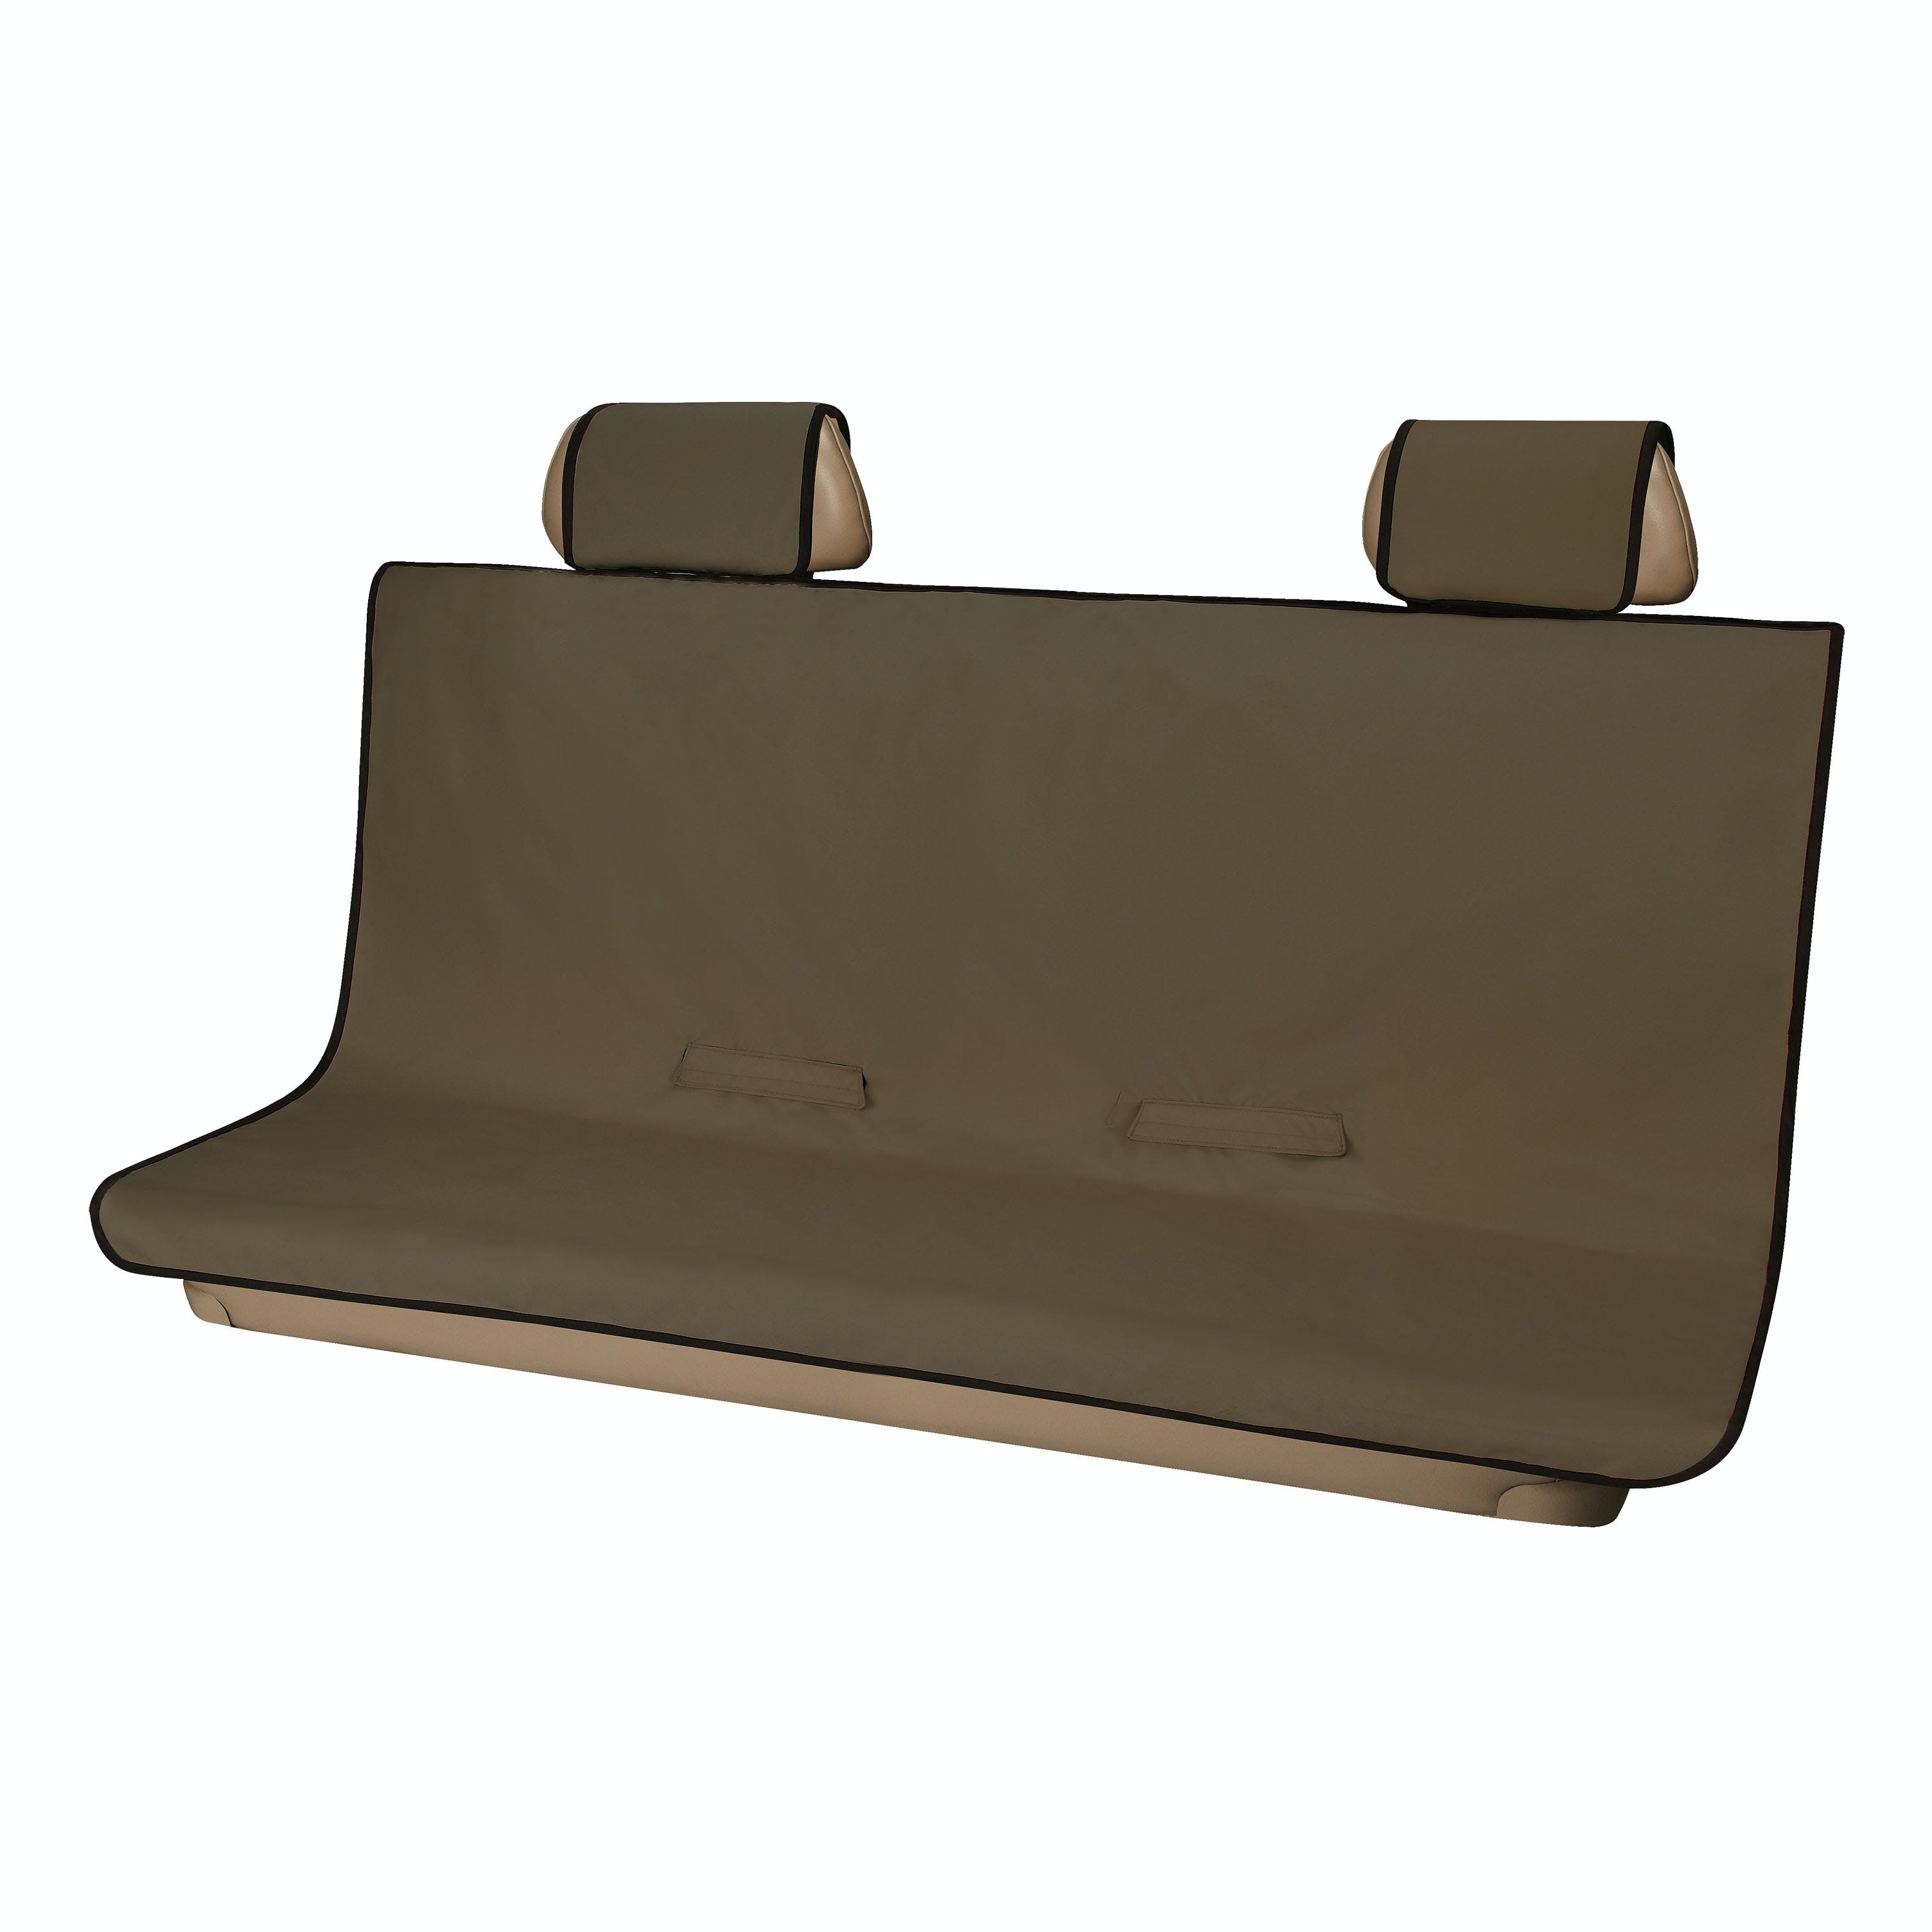 CURT 18522 Seat Defender 58 x 63 Removable Waterproof Brown XL Bench Truck Seat Cover